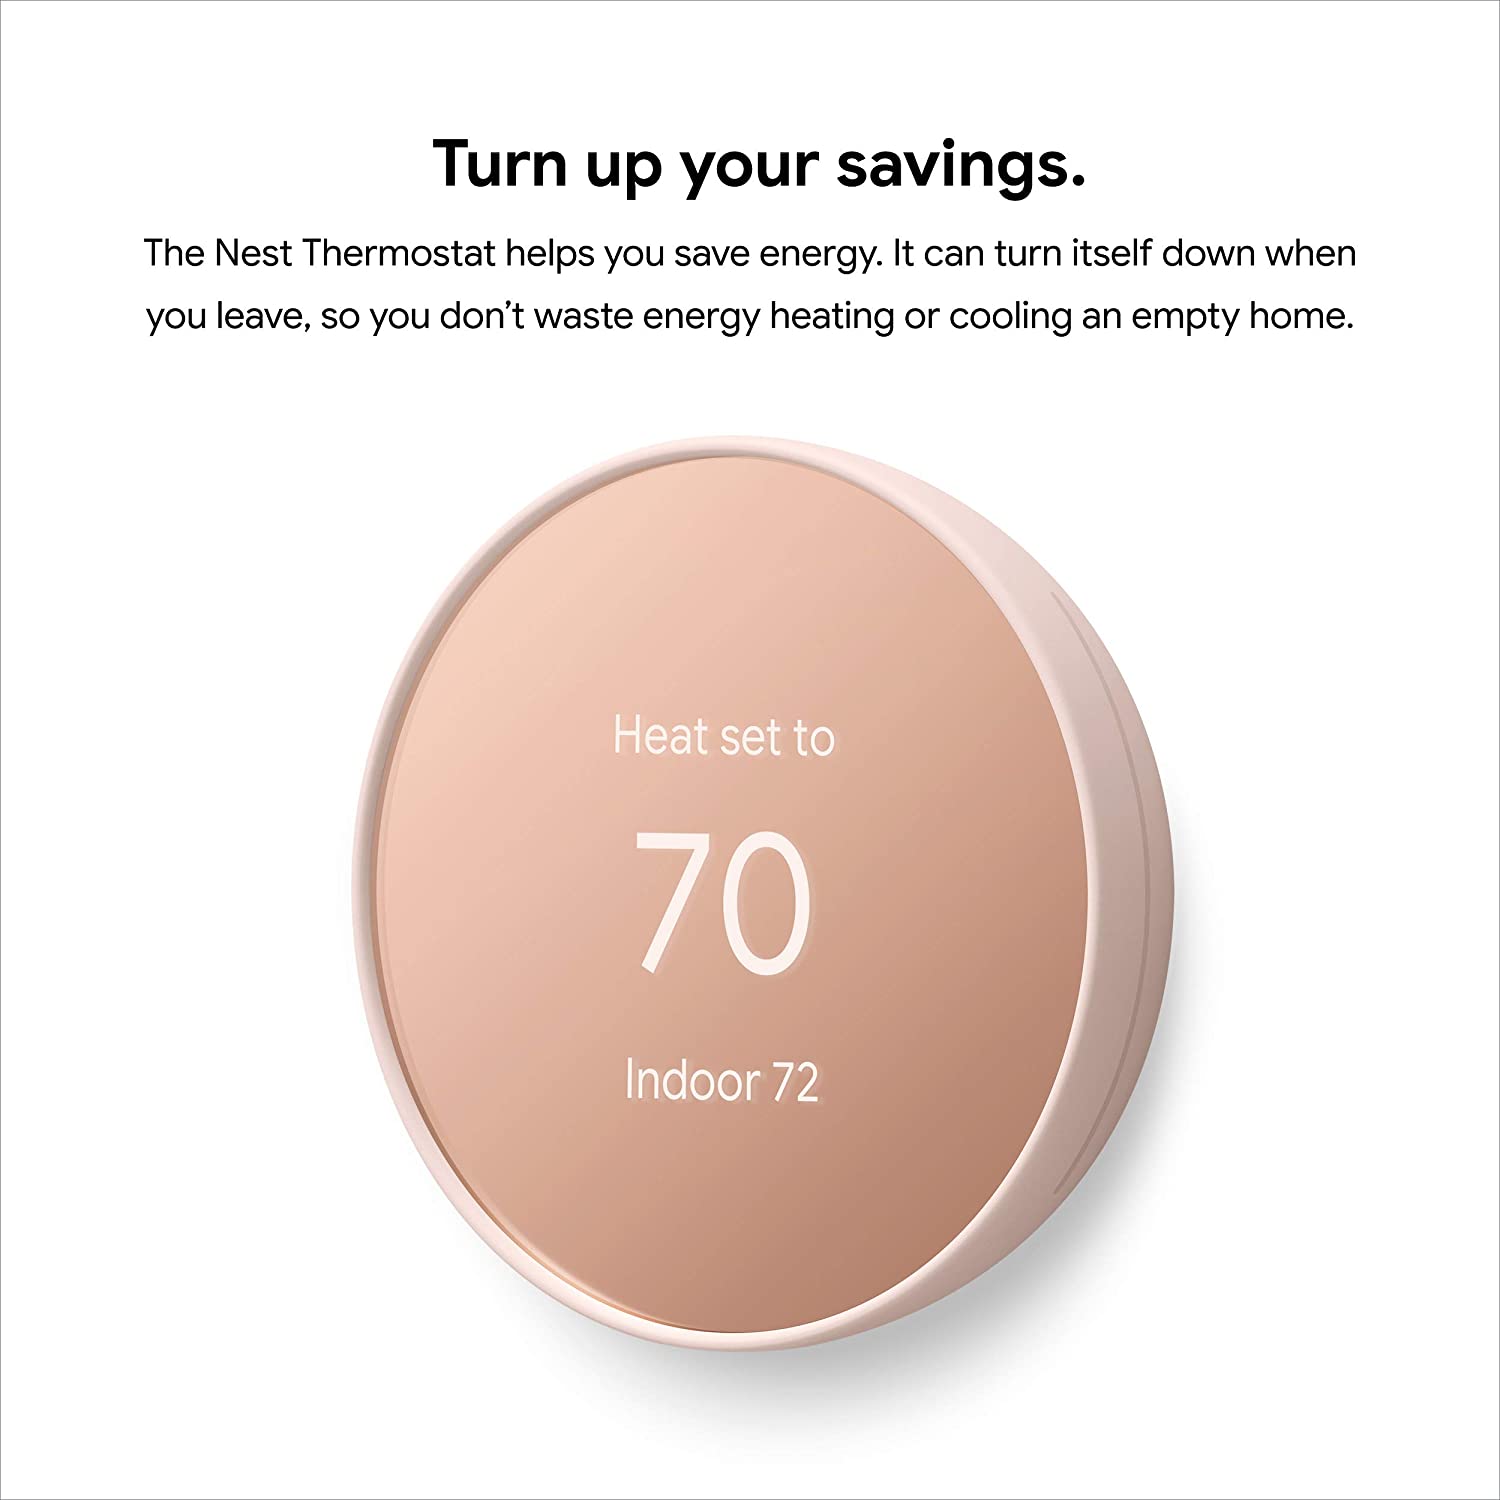 Google Nest Thermostat - Smart Thermostat for Home - Programmable Wifi Thermostat - Snow...